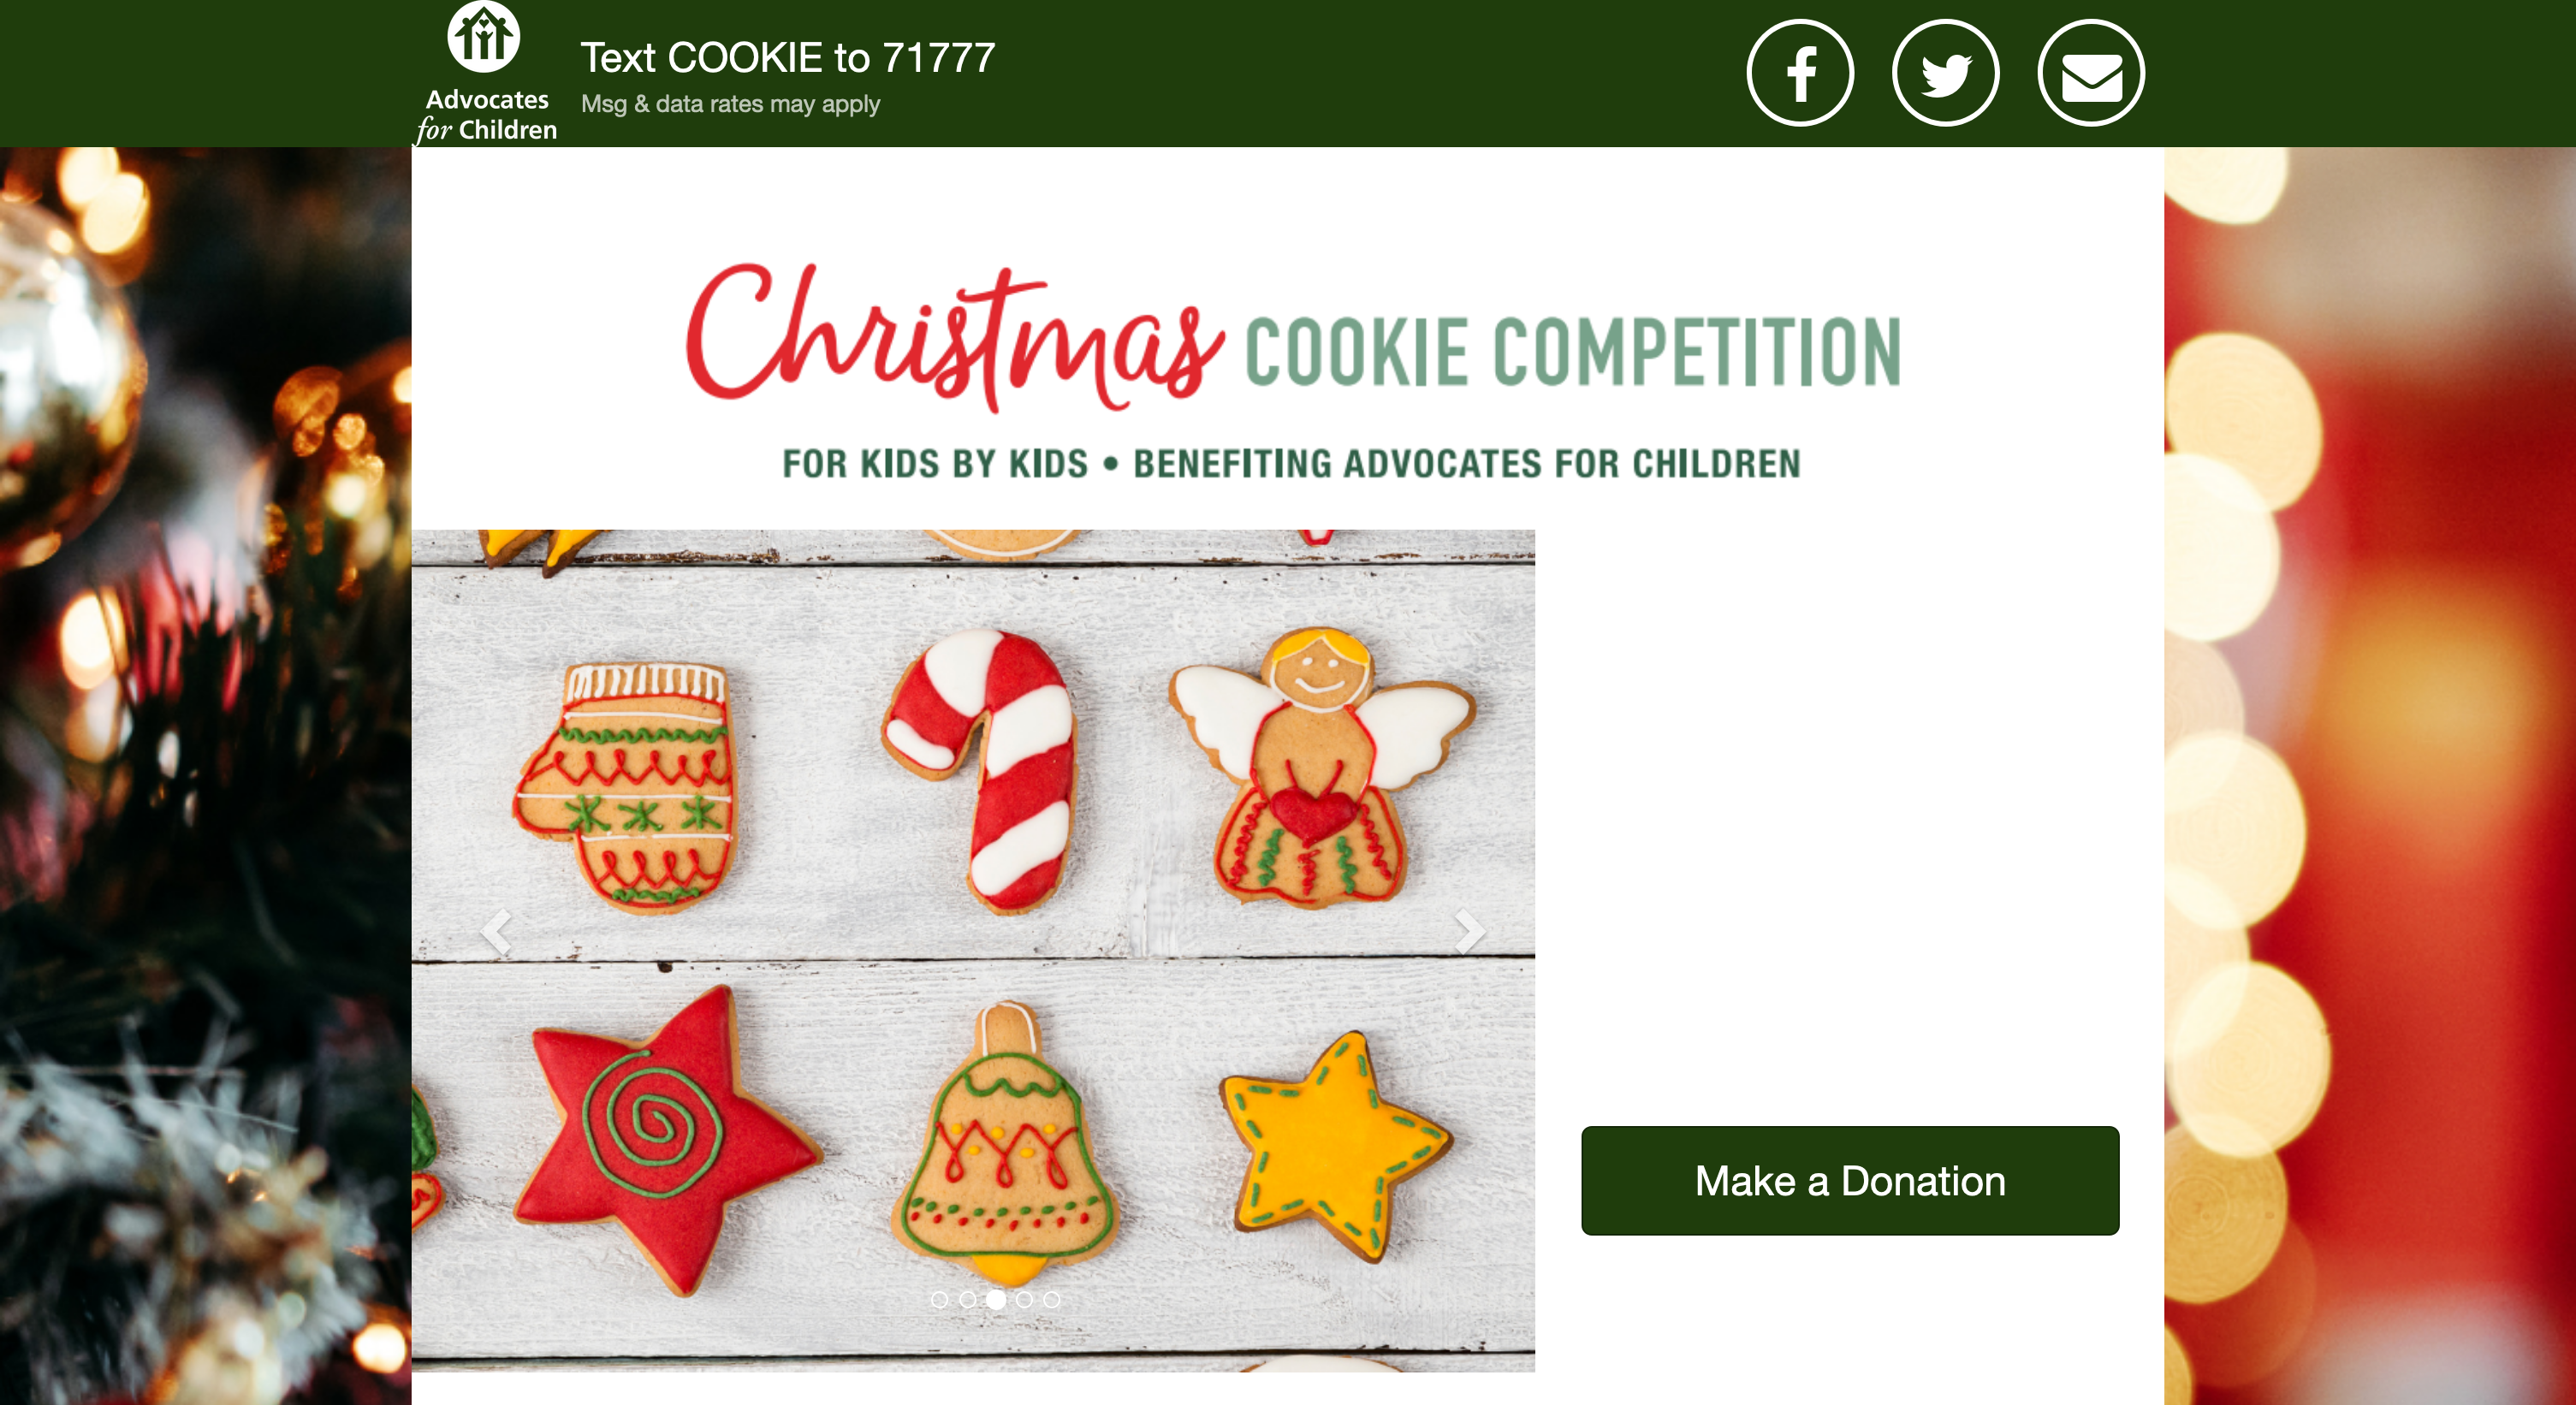 Advocates for Children Christmas Cookie Competition